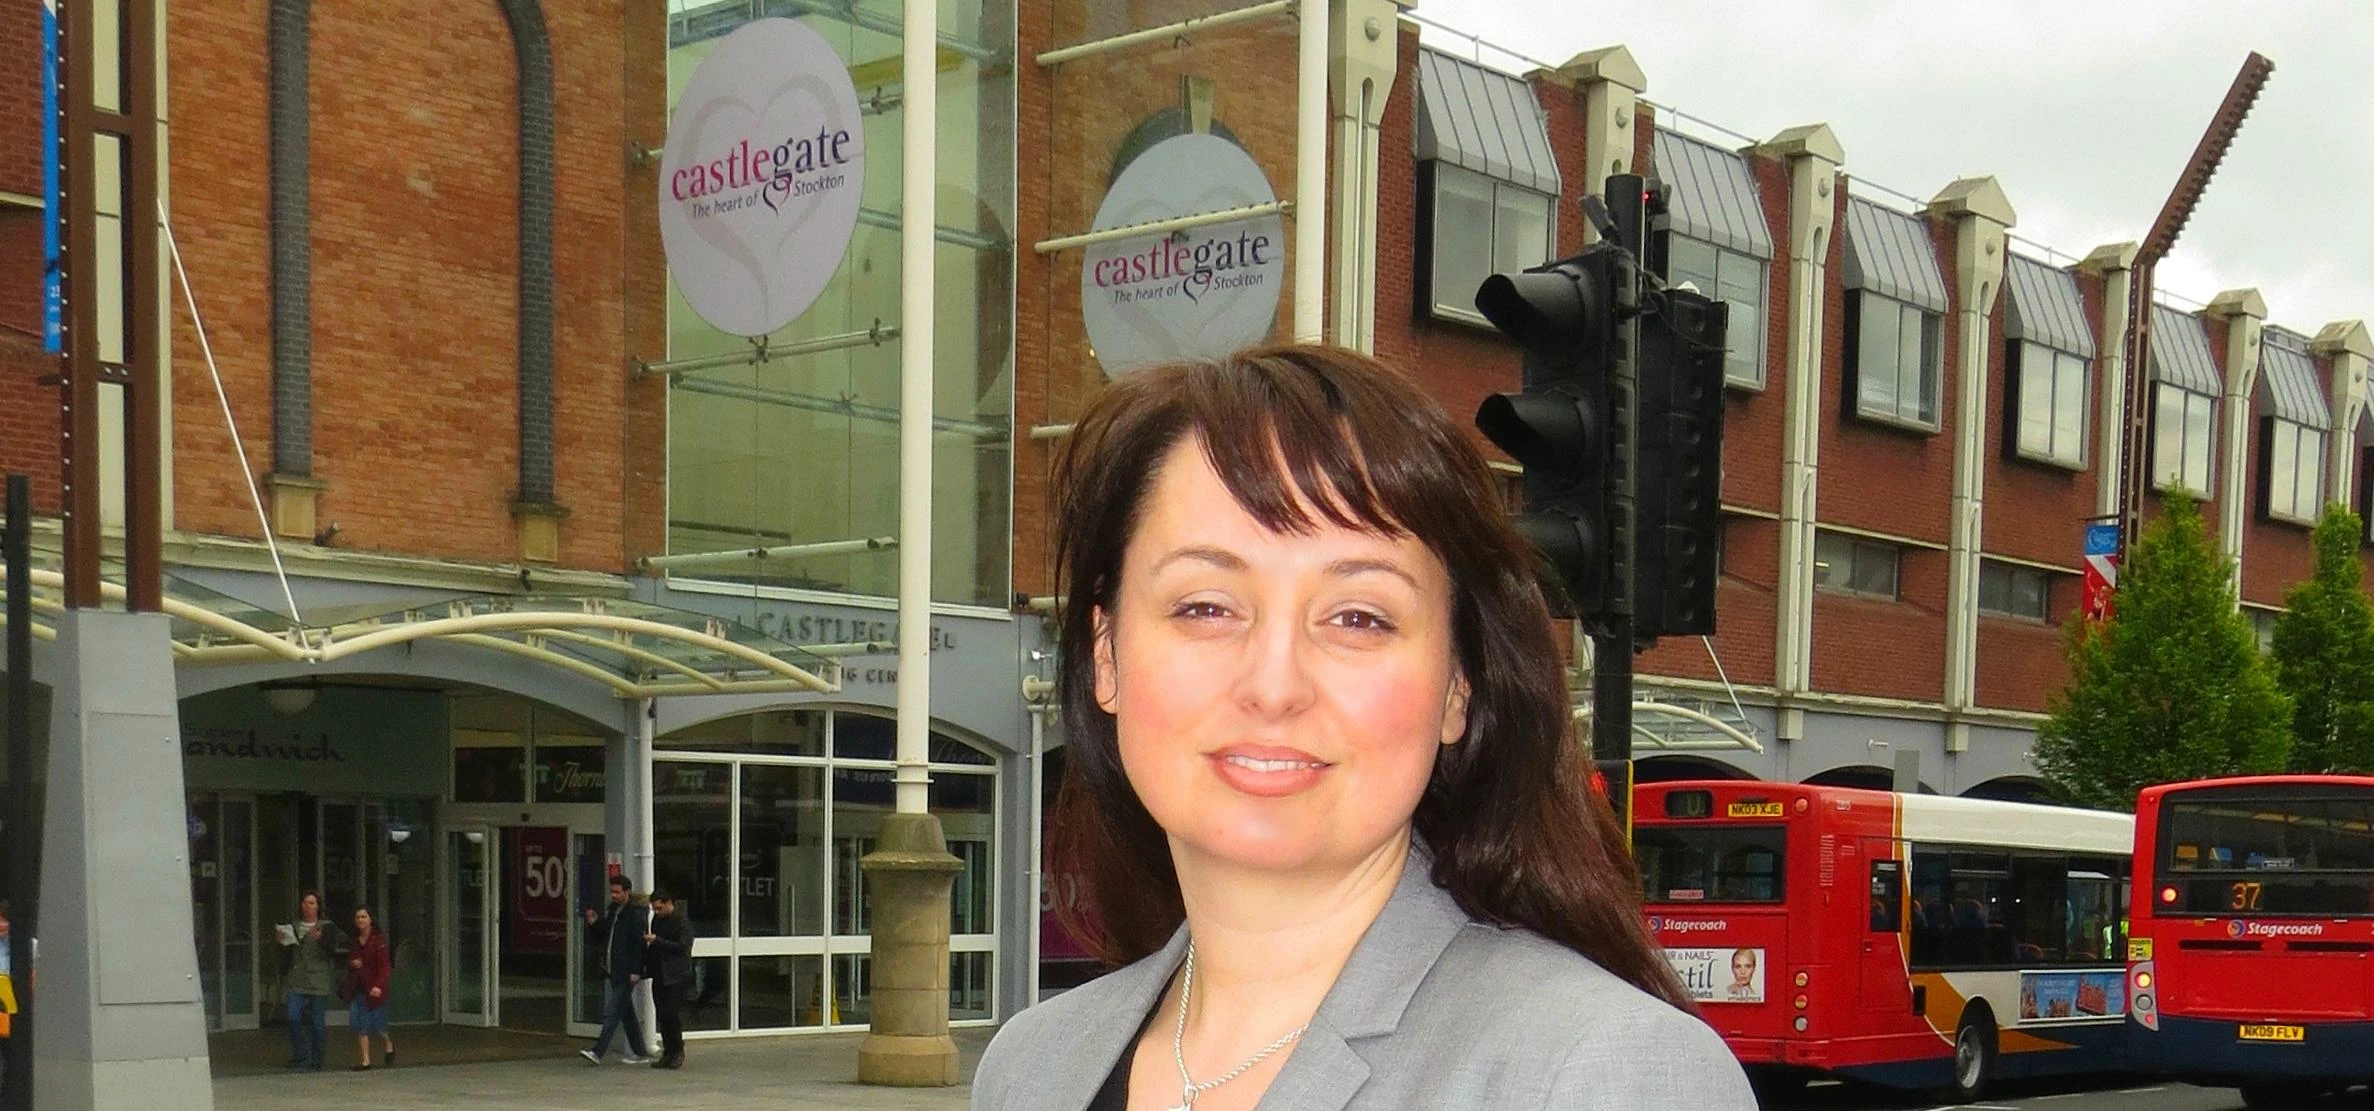 Tracey Surtees - Acting Centre Manager at Castlegate Shopping Centre fully supports the BID. 